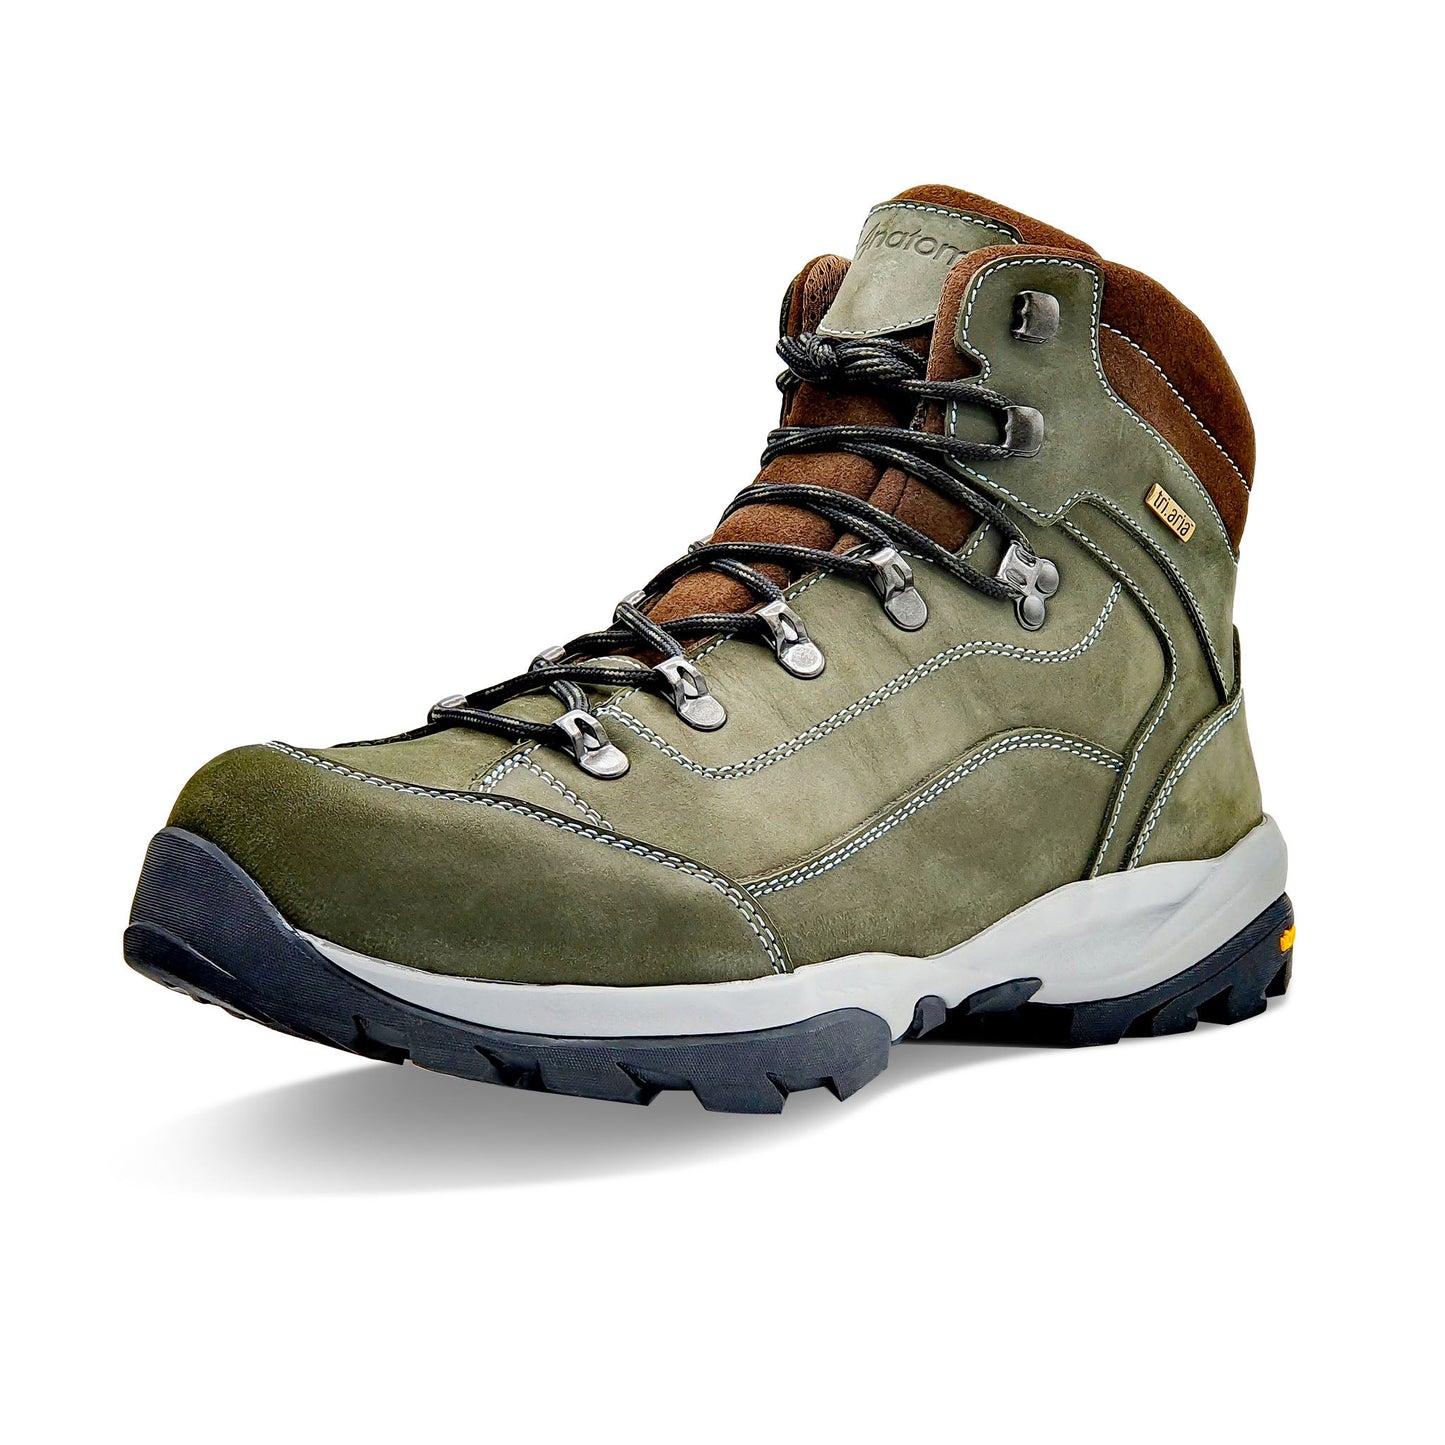 NEW ANATOM Women's Q2 Trail Light Hiking Boots with Vibram outsole.